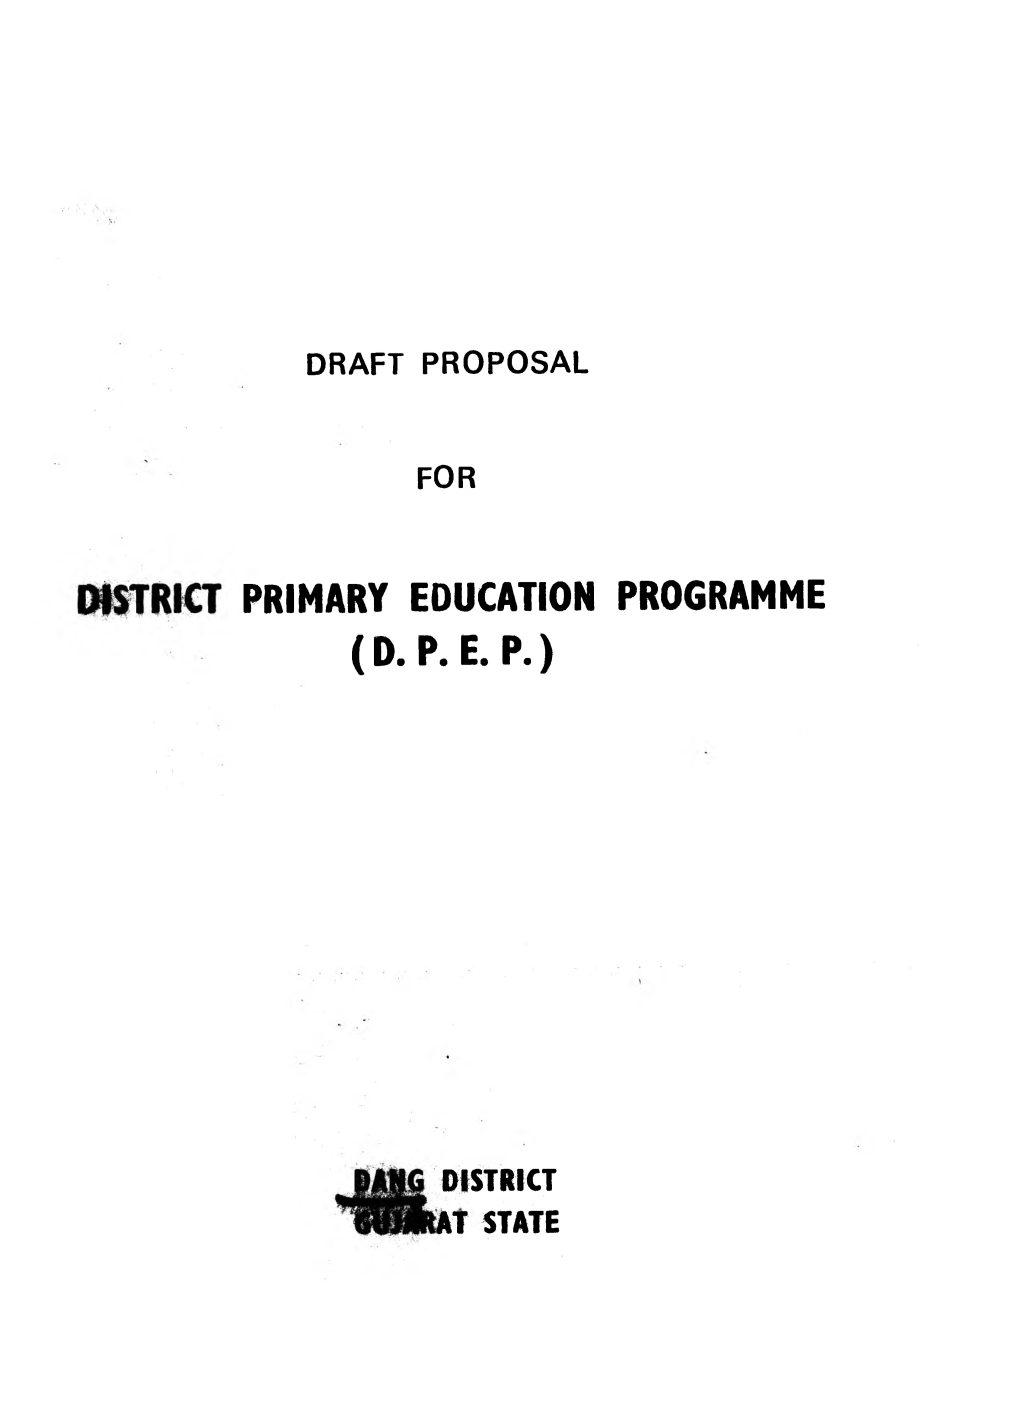 Primary Education Programme (Dpep)